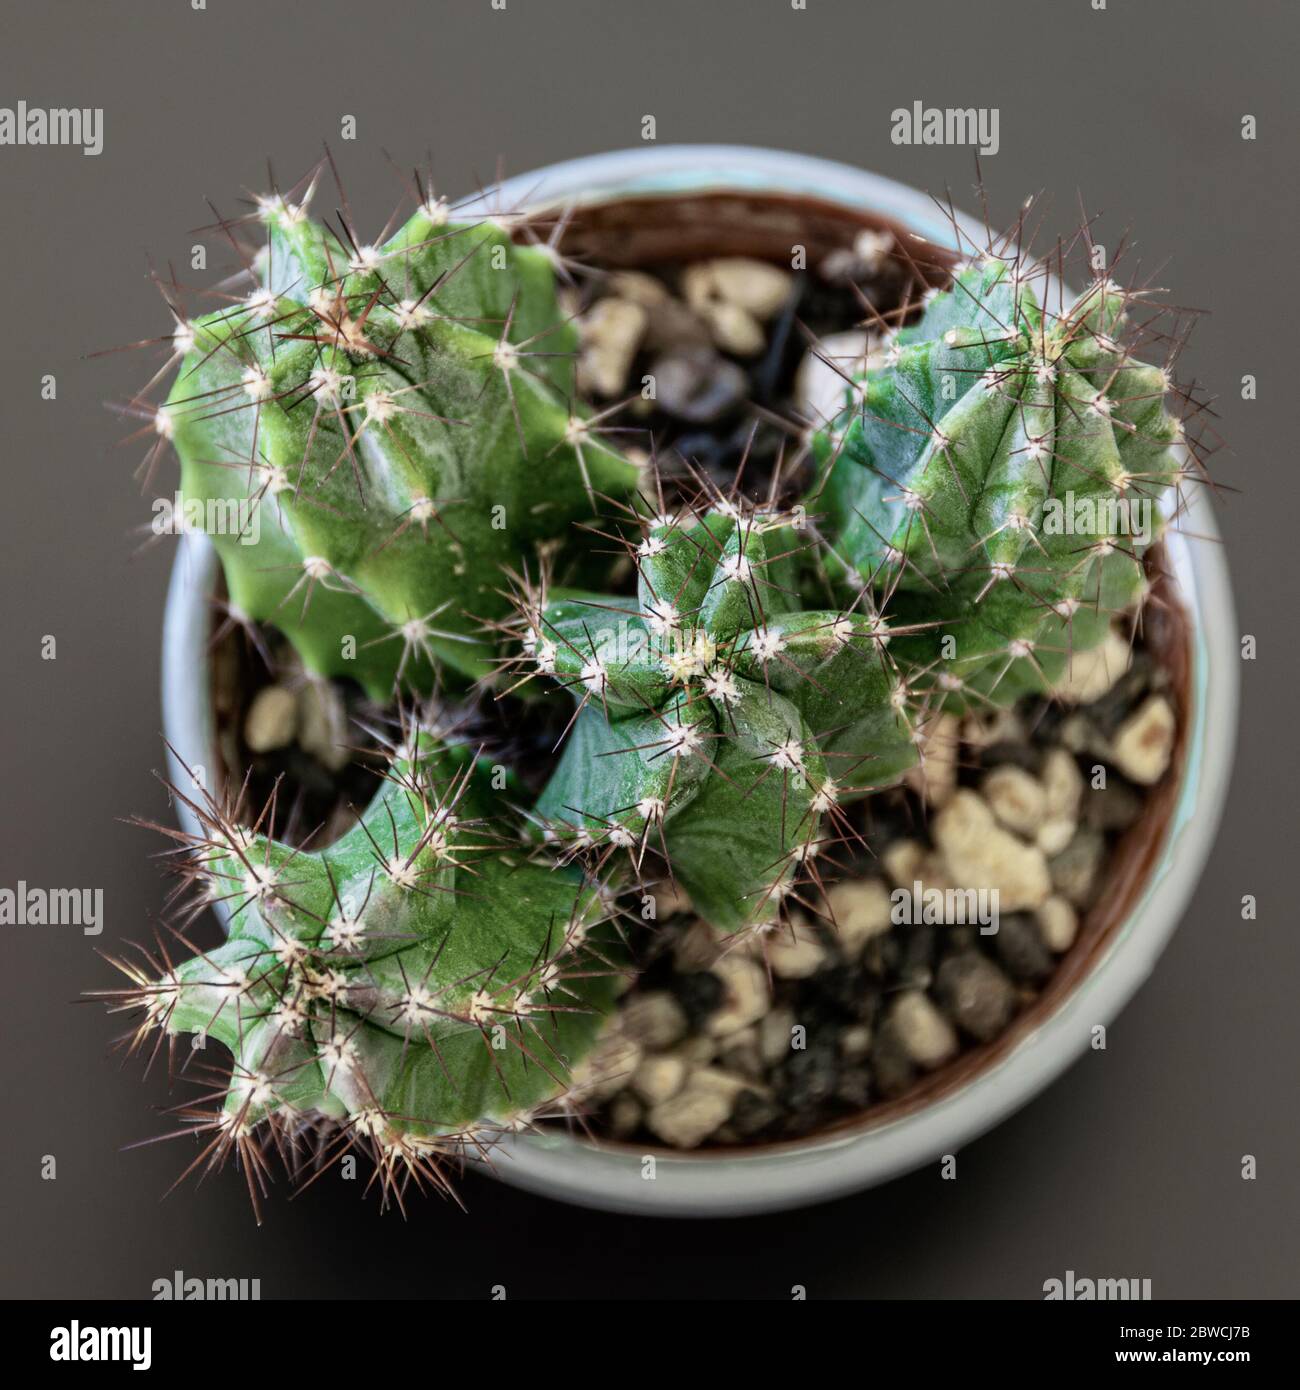 Jungle Cactus High Resolution Stock Photography and Images   Alamy